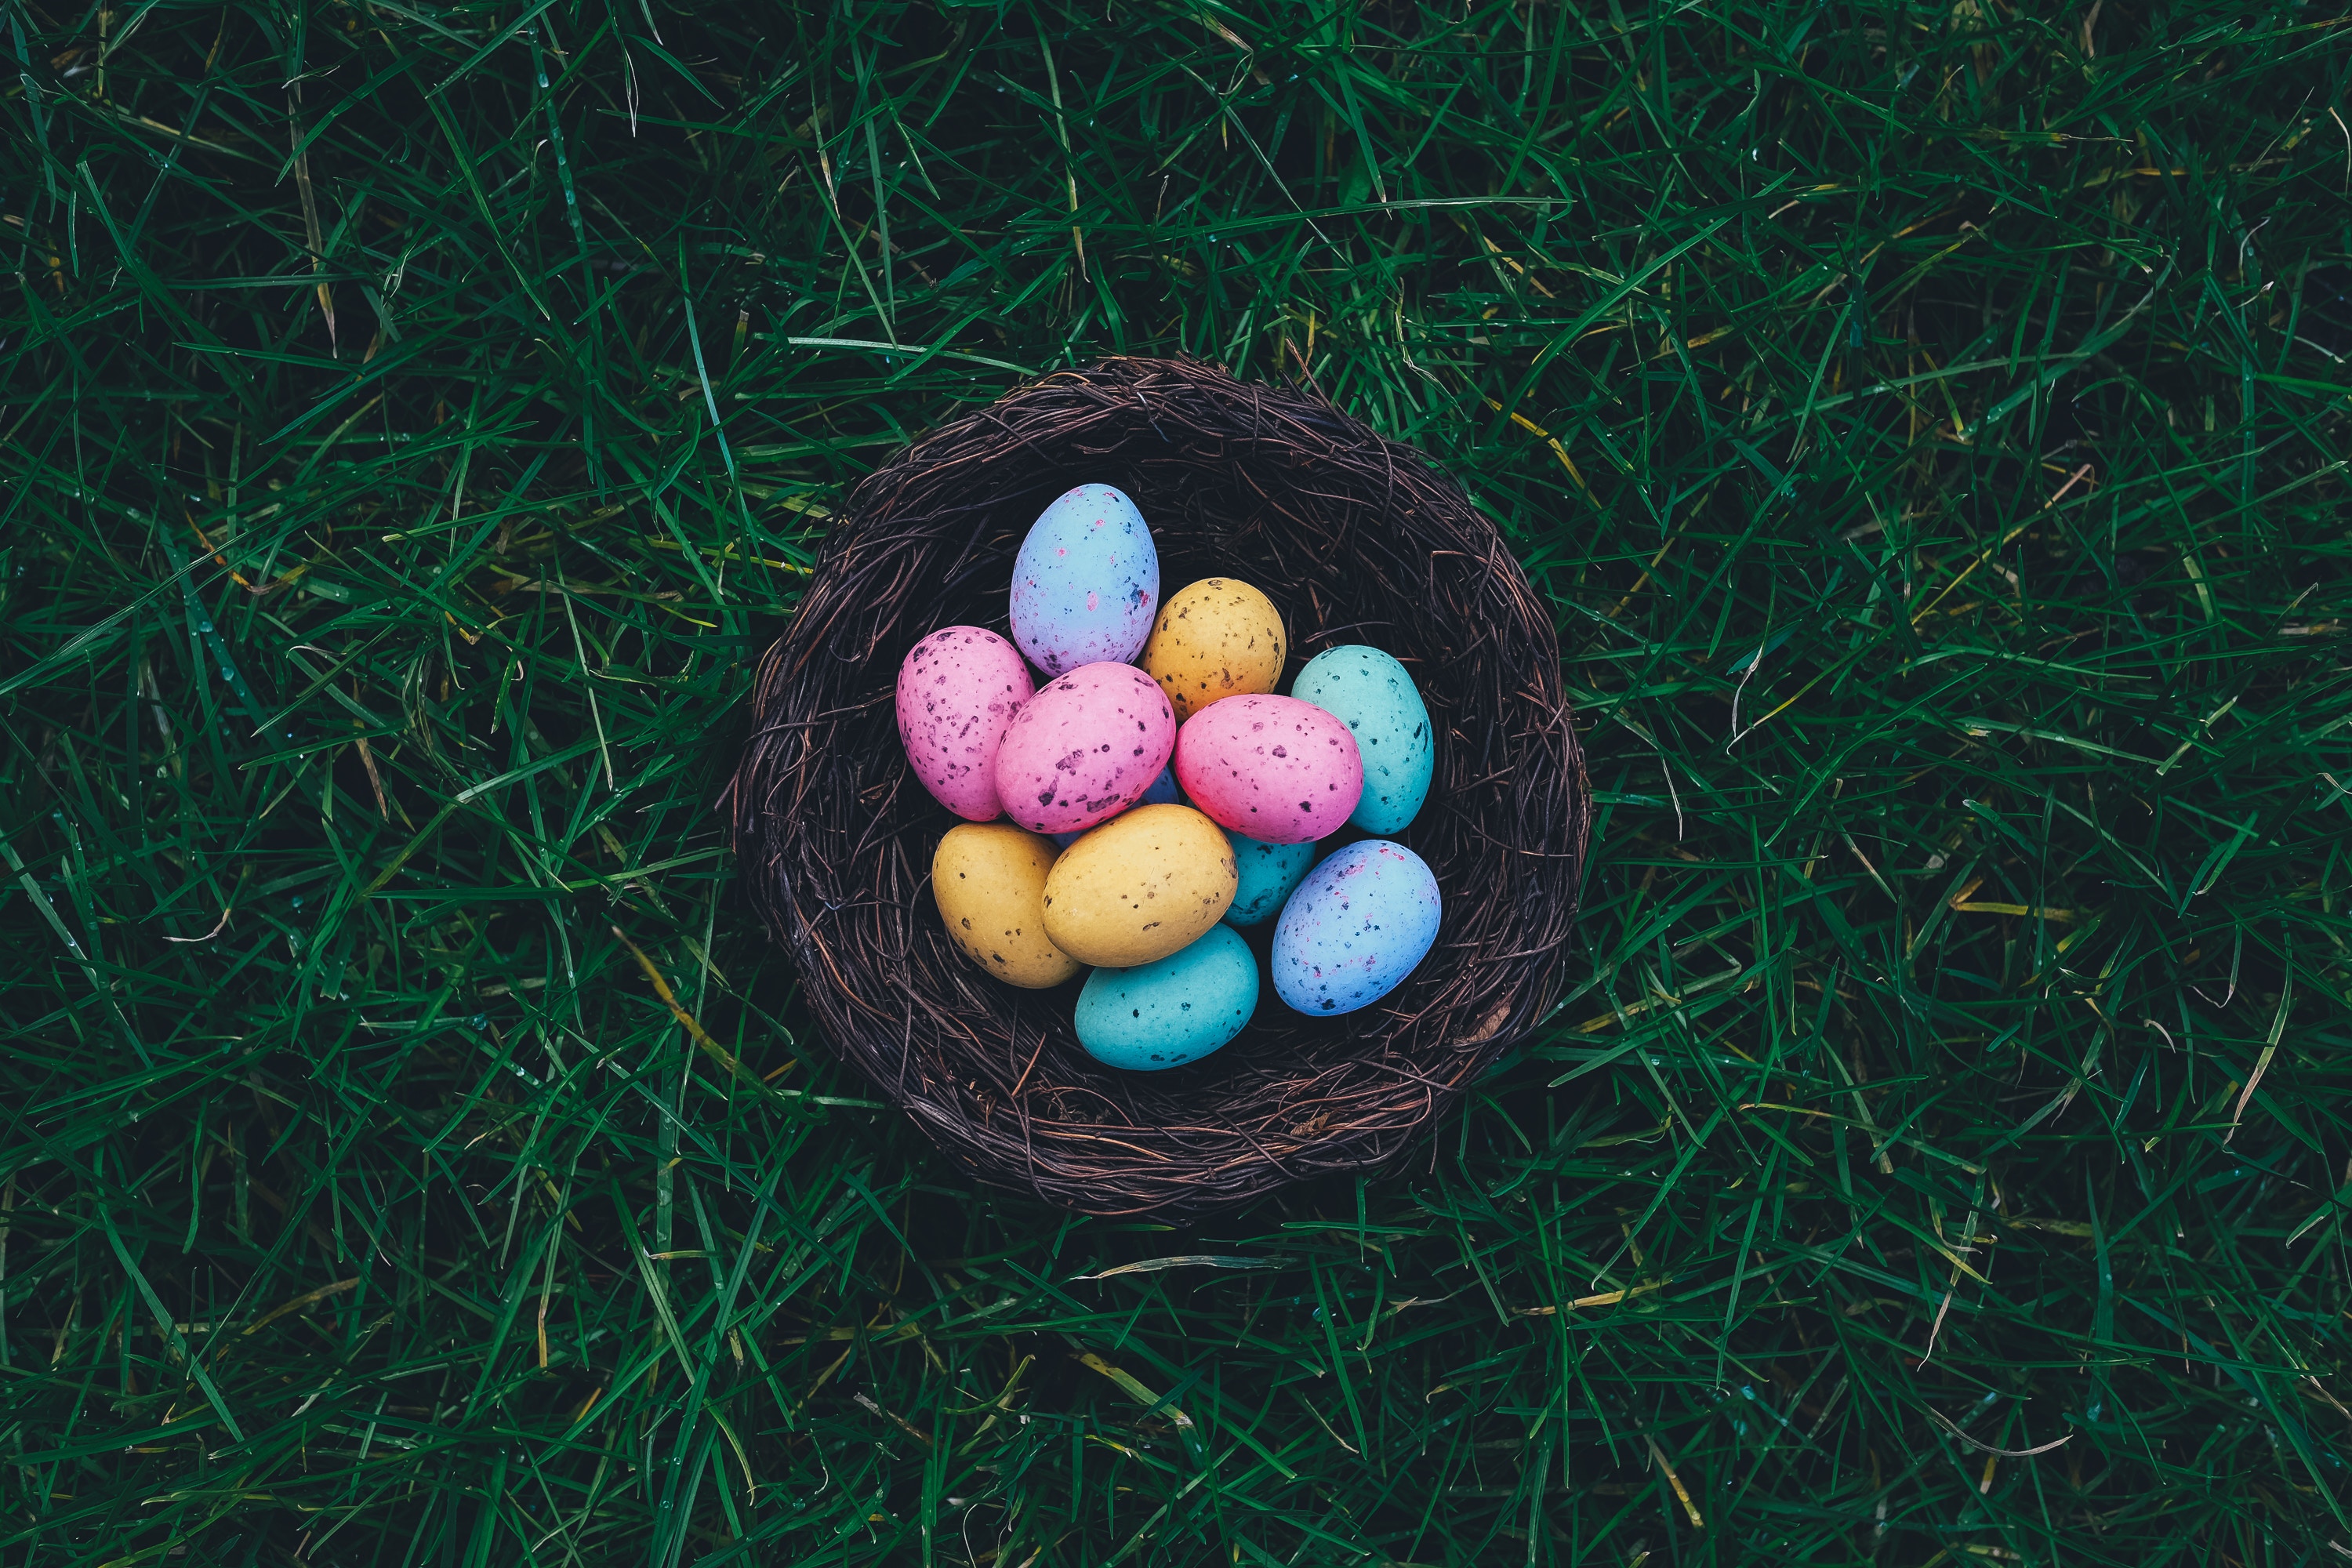 20 Egg cellent Captions And Quotes For Your Easter Pictures